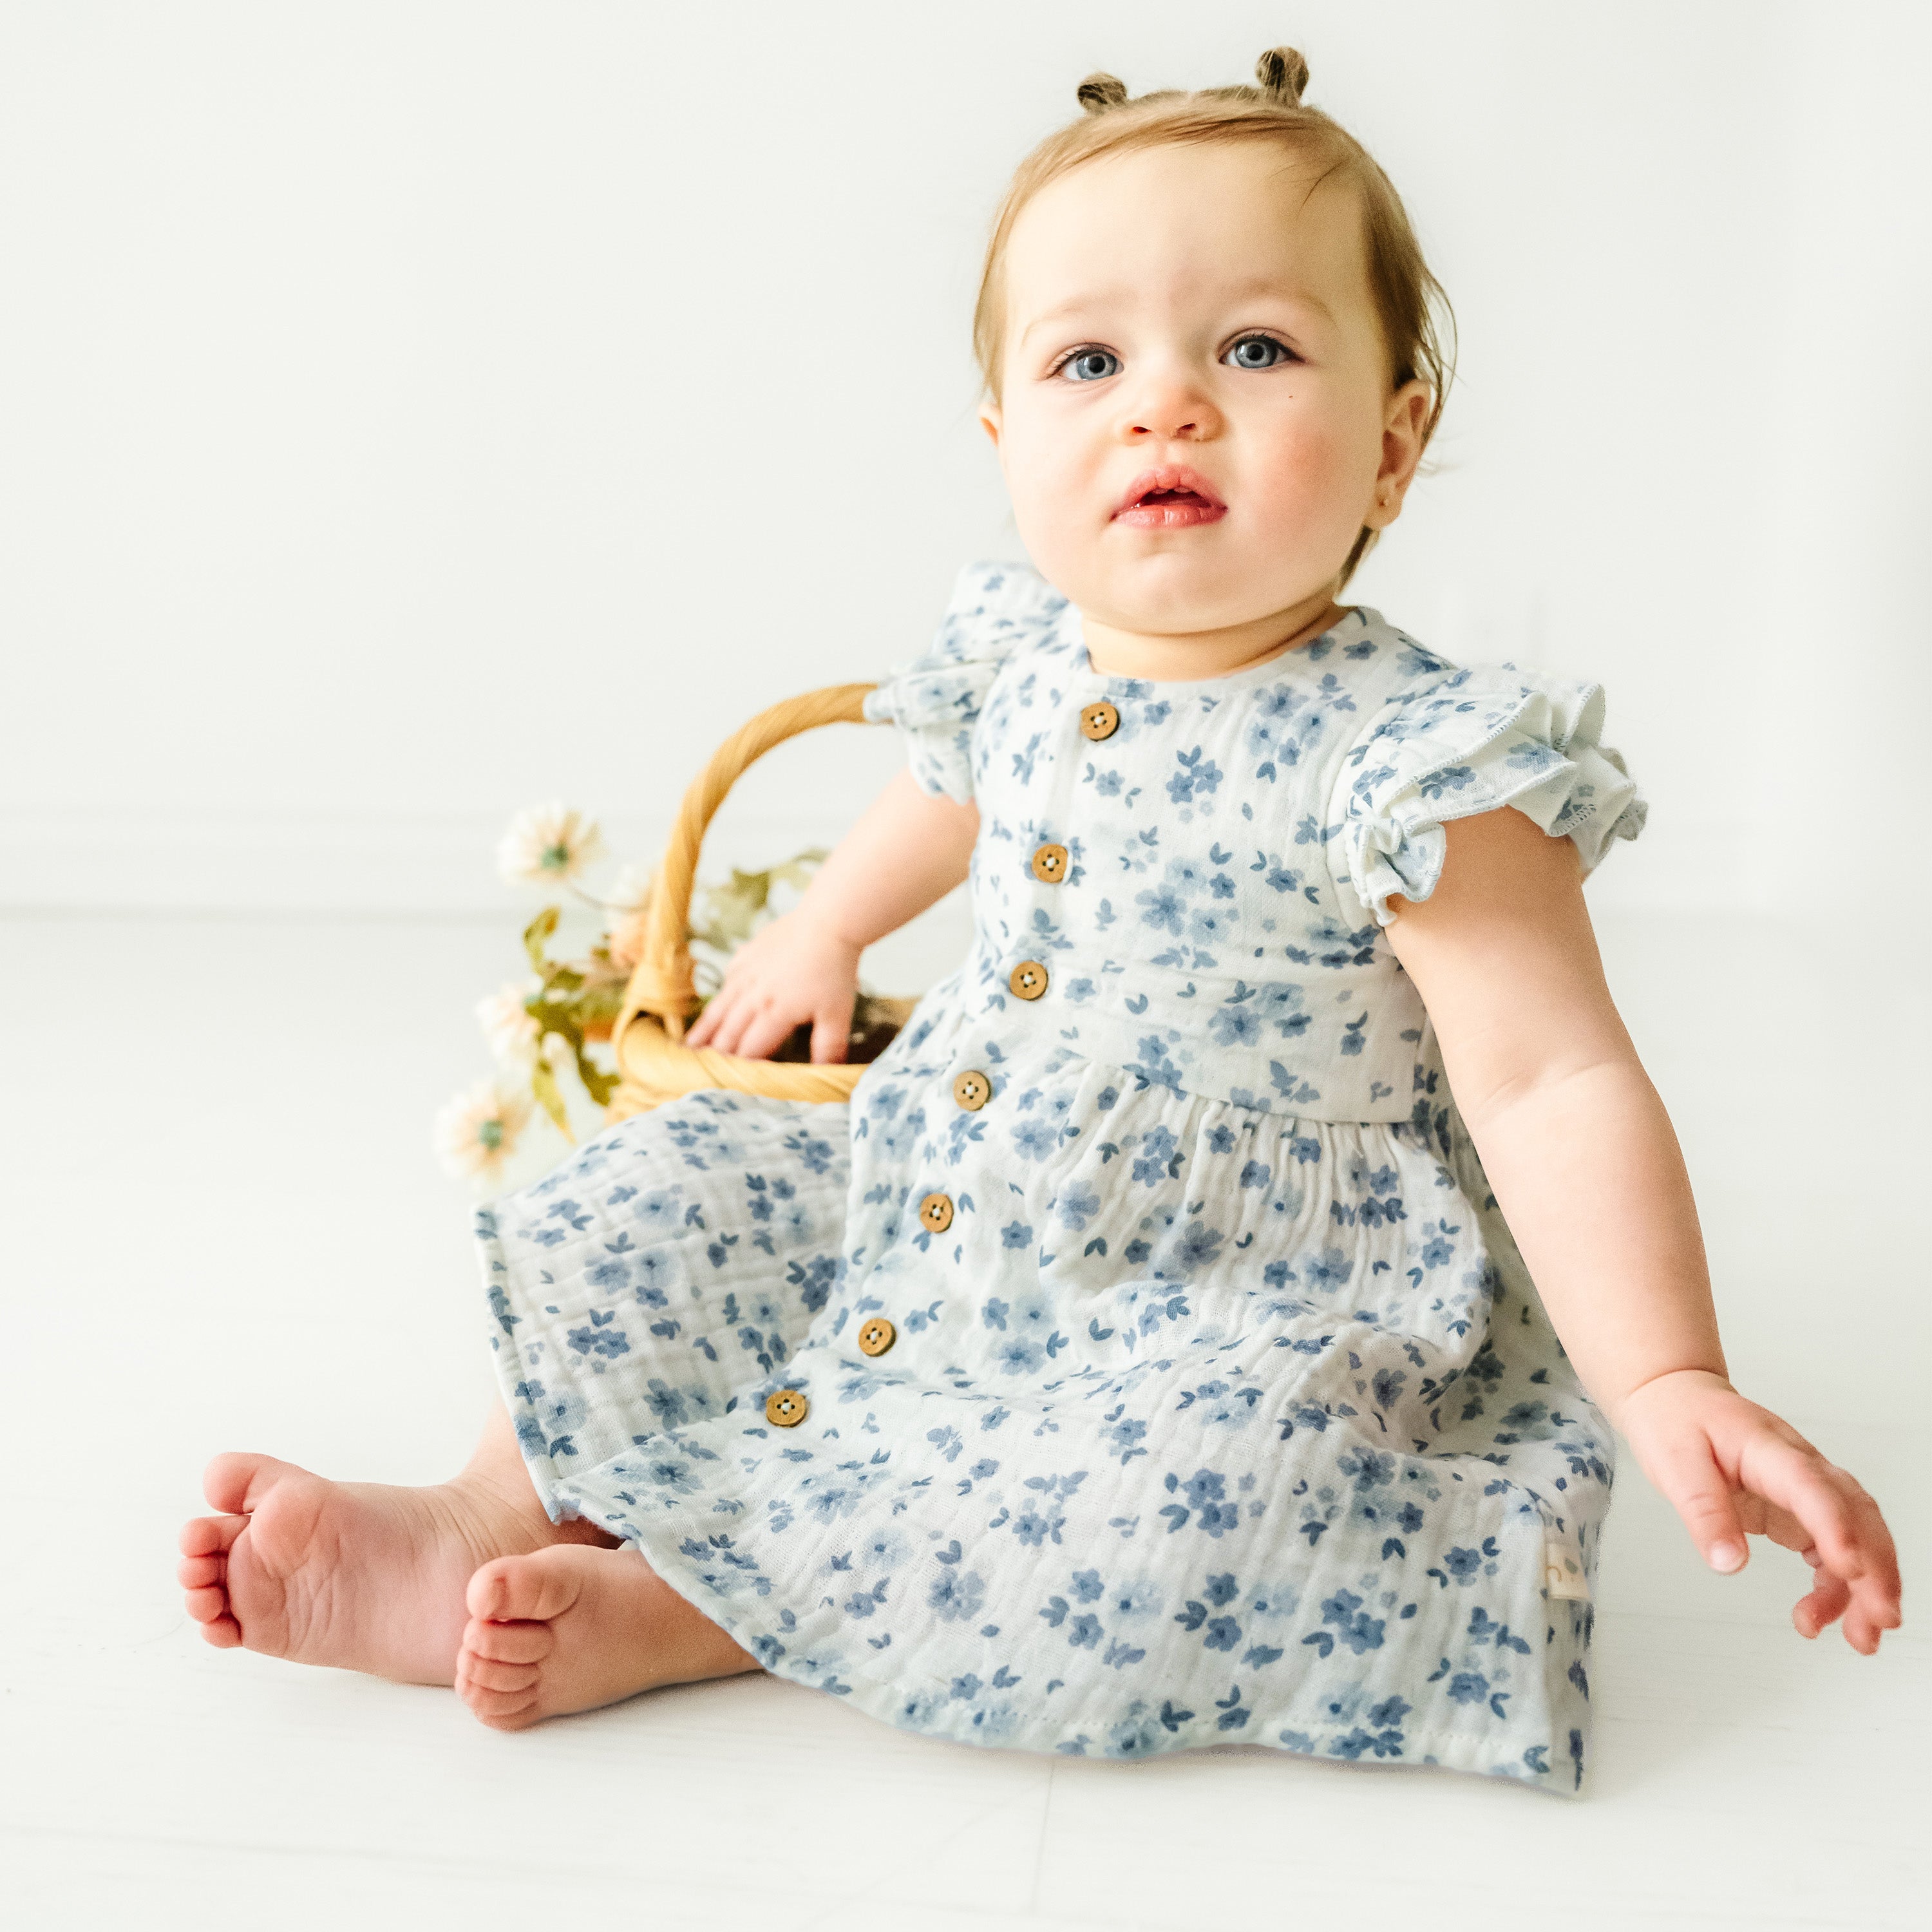 A baby girl with light brown hair in pigtails, wearing a Makemake Organics Organic Muslin Button Flutter Dress in Periwinkle, sits on a white floor next to a basket of flowers, looking curious.